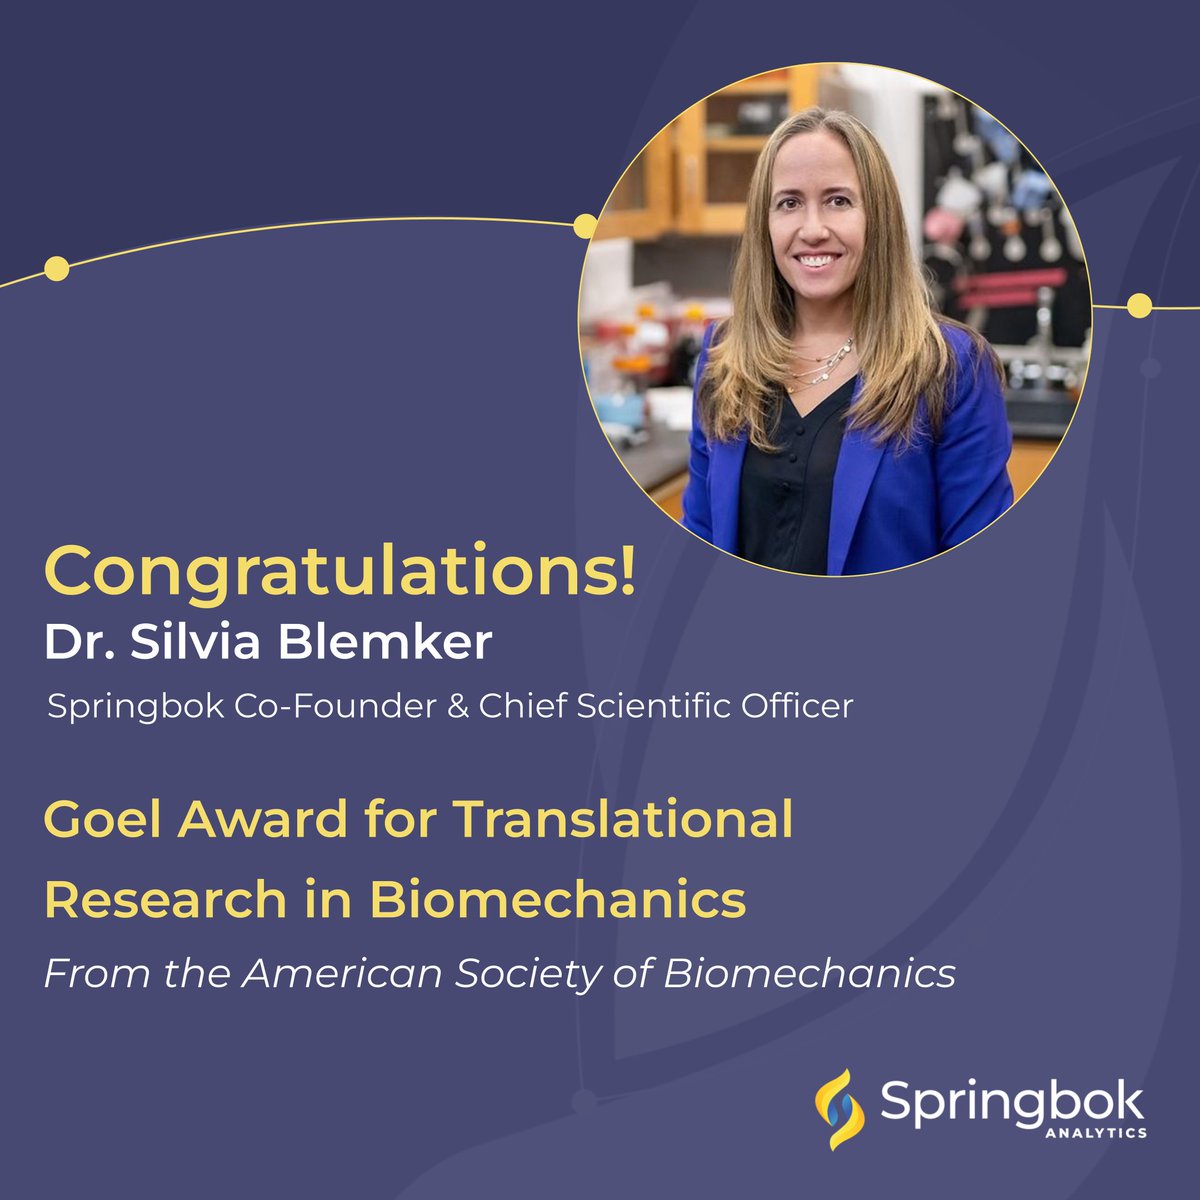 Join us in congratulating our Co-Founder Silvia Blemker, who was awarded the Goel Award for Translational Research in Biomechanics by the American Society of Biomechanics.

Dr. Blemker is the first woman to win this award.

#WomenInSports #WomenInTech